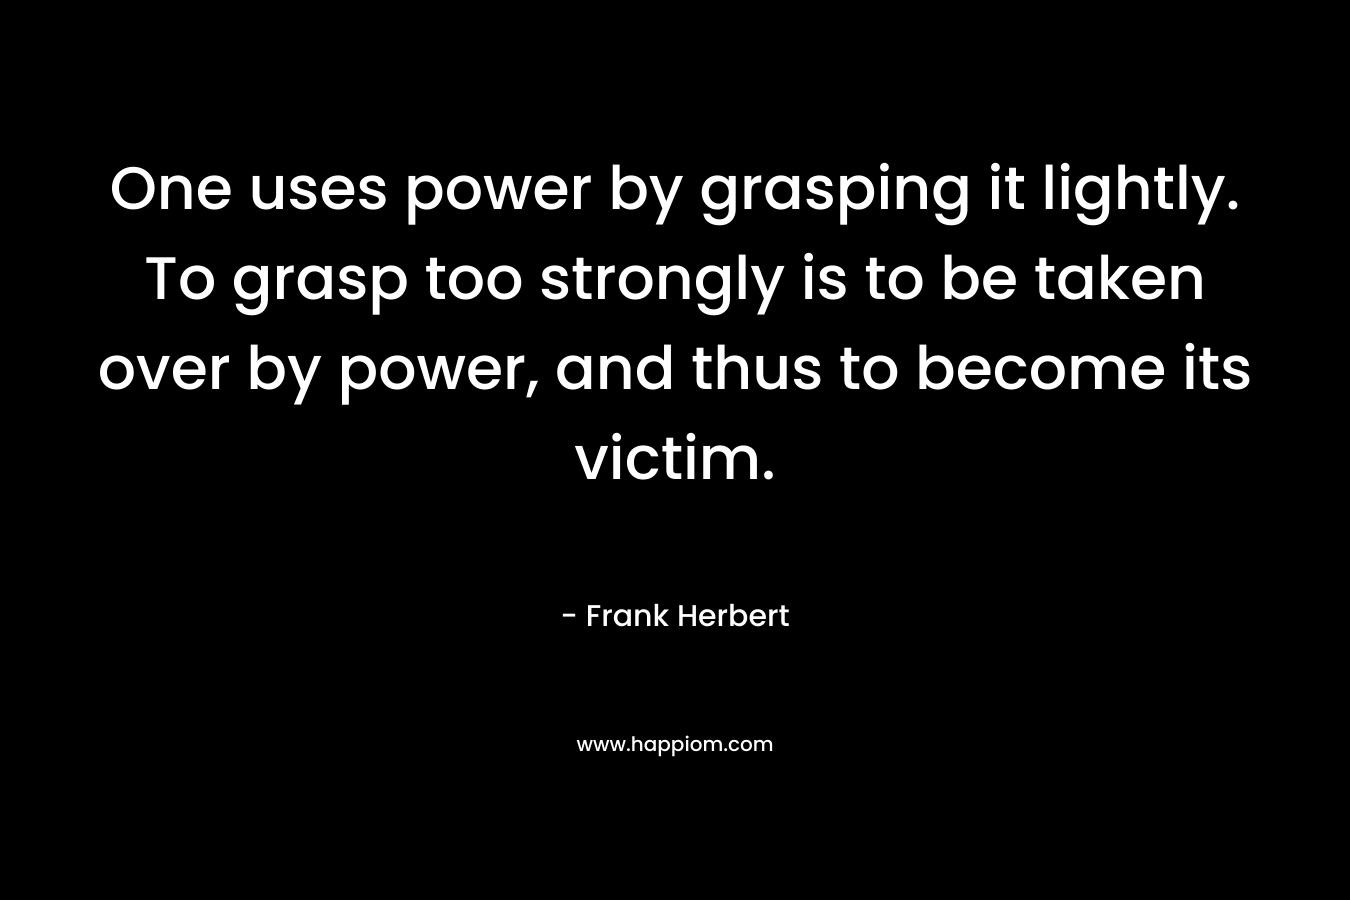 One uses power by grasping it lightly. To grasp too strongly is to be taken over by power, and thus to become its victim. – Frank Herbert